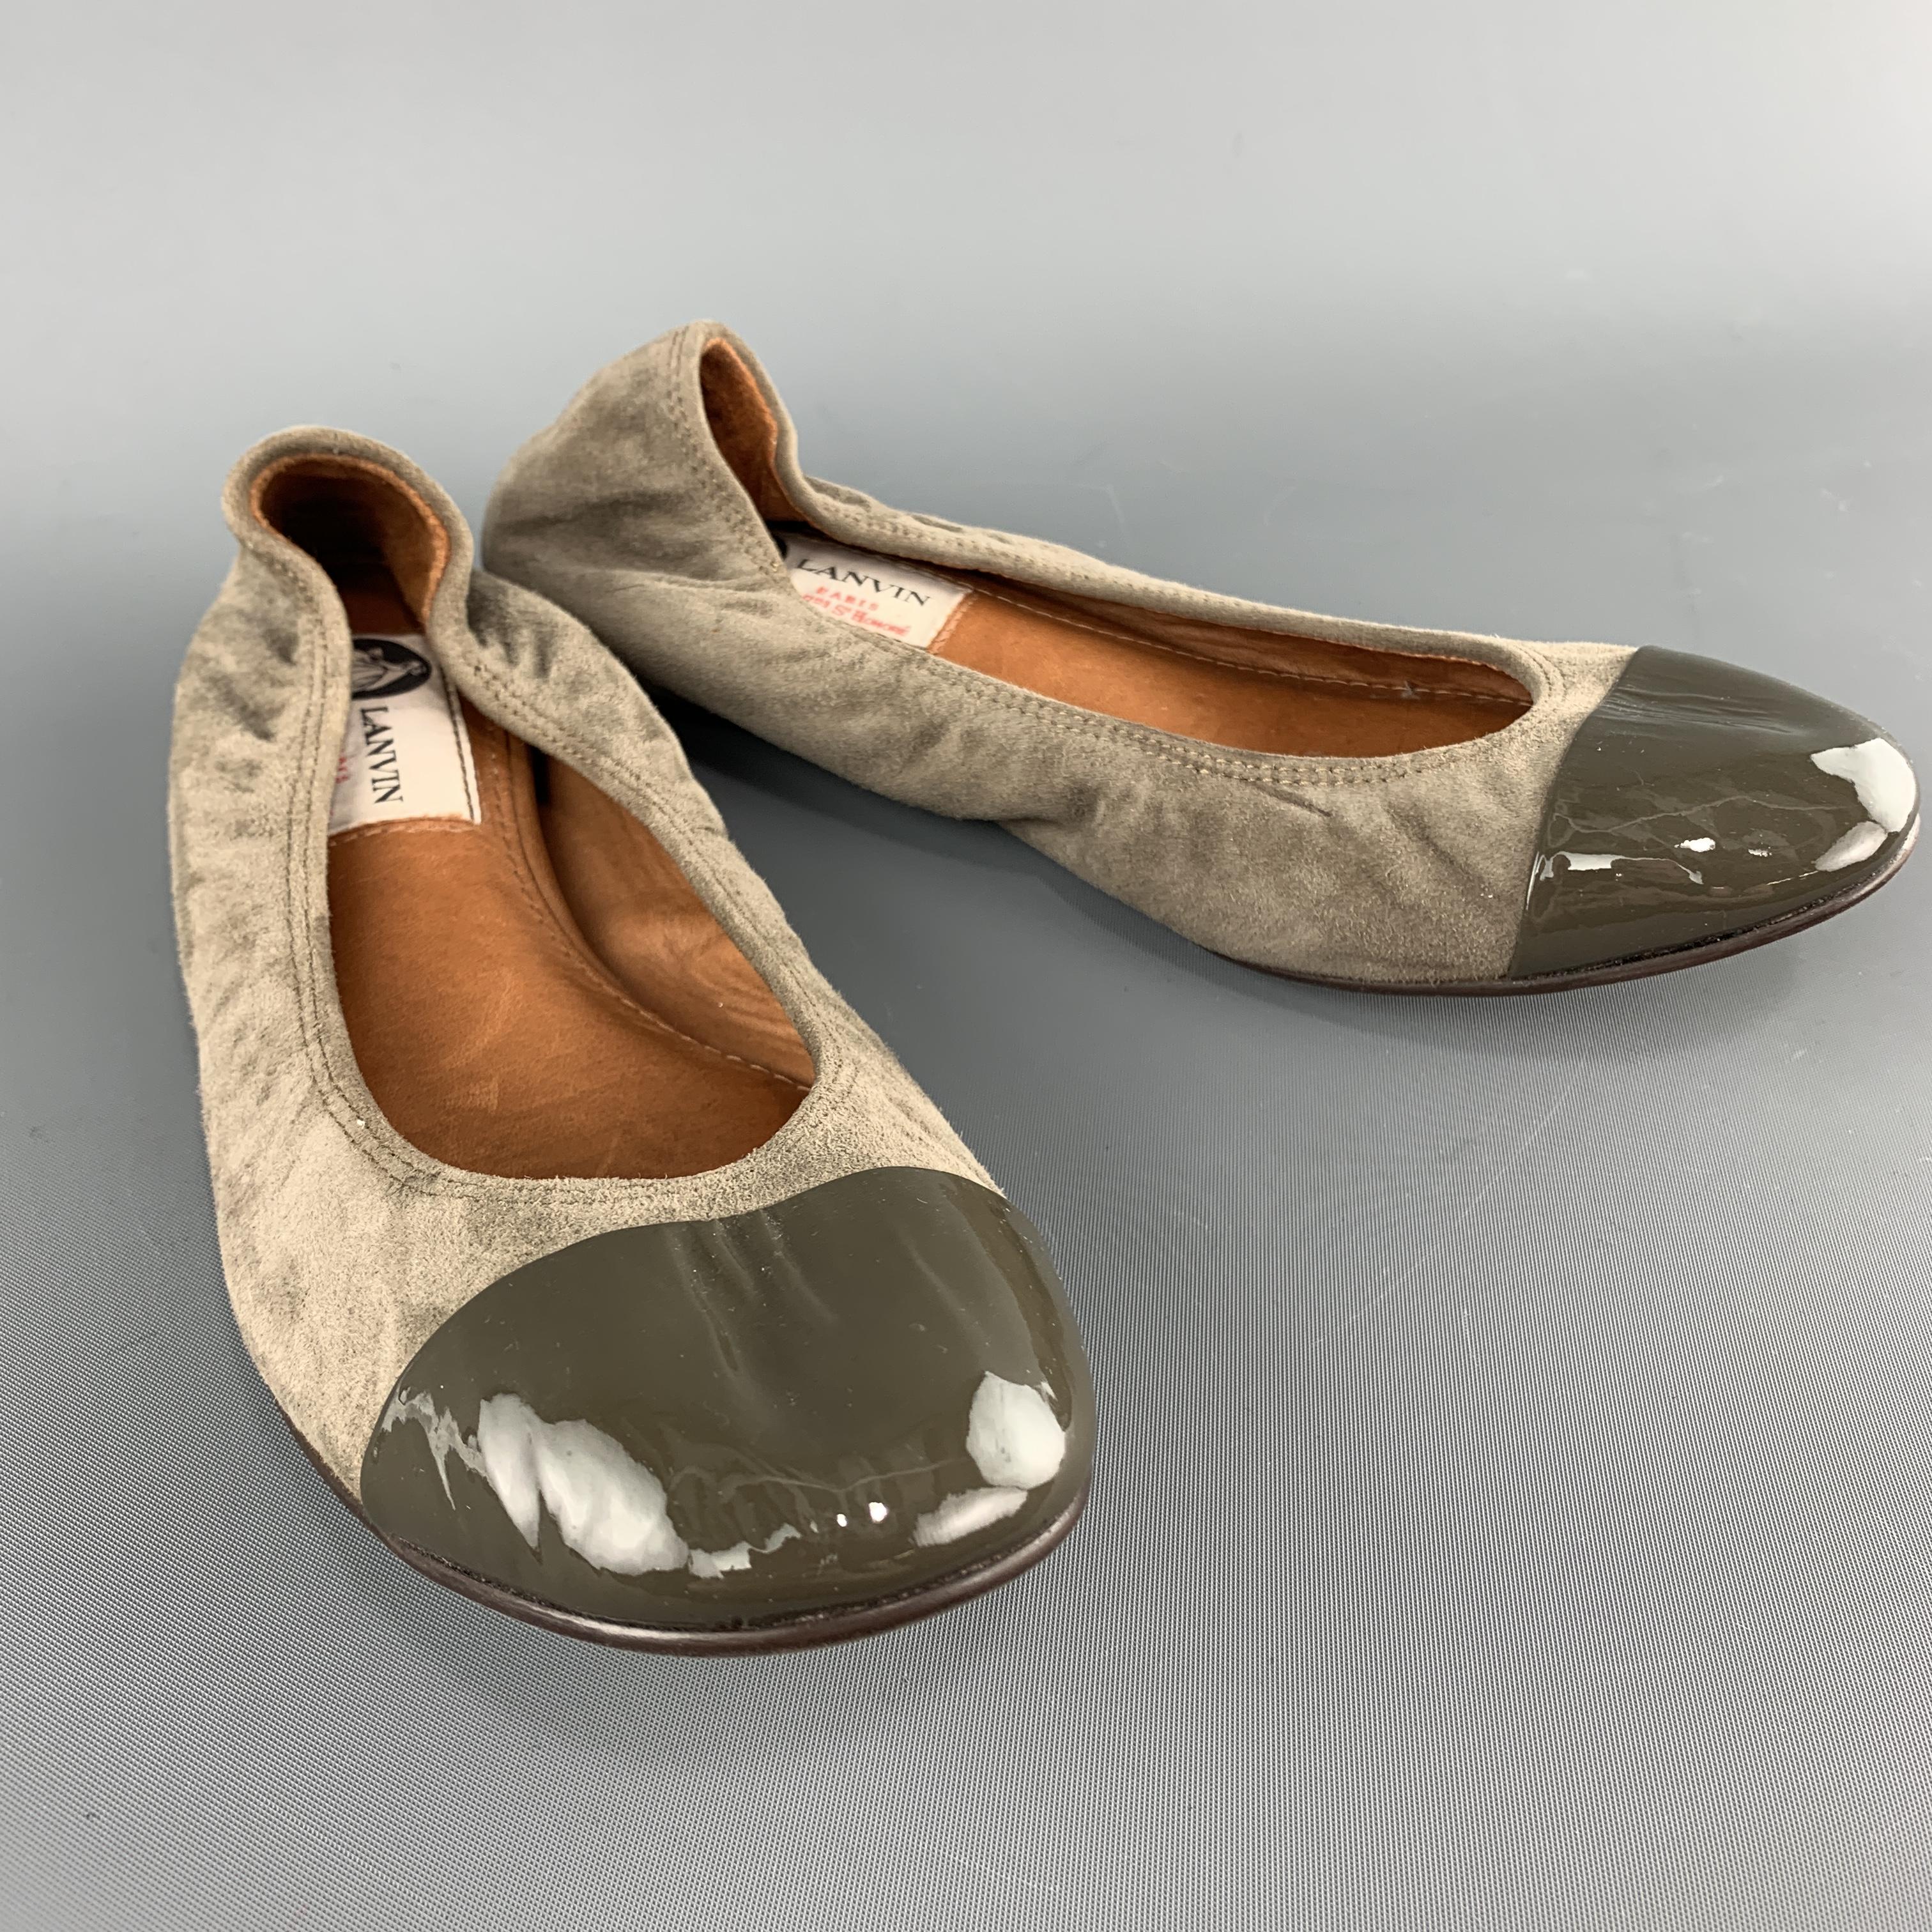 LANVIN flats come in taupe gray suede with a patent leather toe cap. With box. Made in Portugal. 

Very Good Pre-Owned Condition.
Marked: IT 36

Outsole: 9.5 x 3 in.